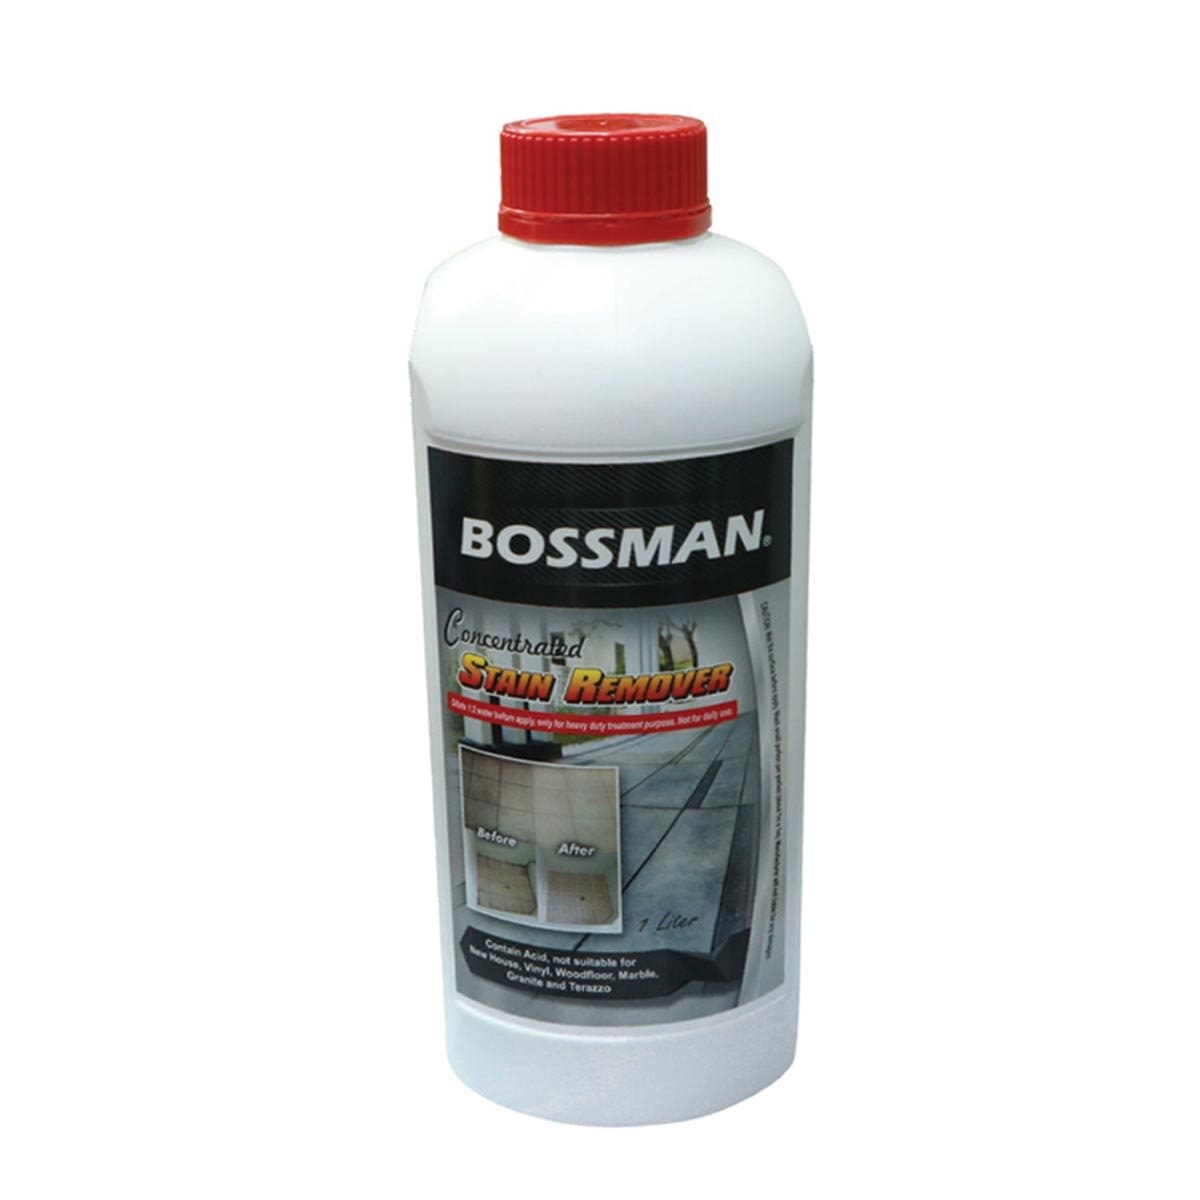 BOSSMAN Concentrated Stain Remover 1L